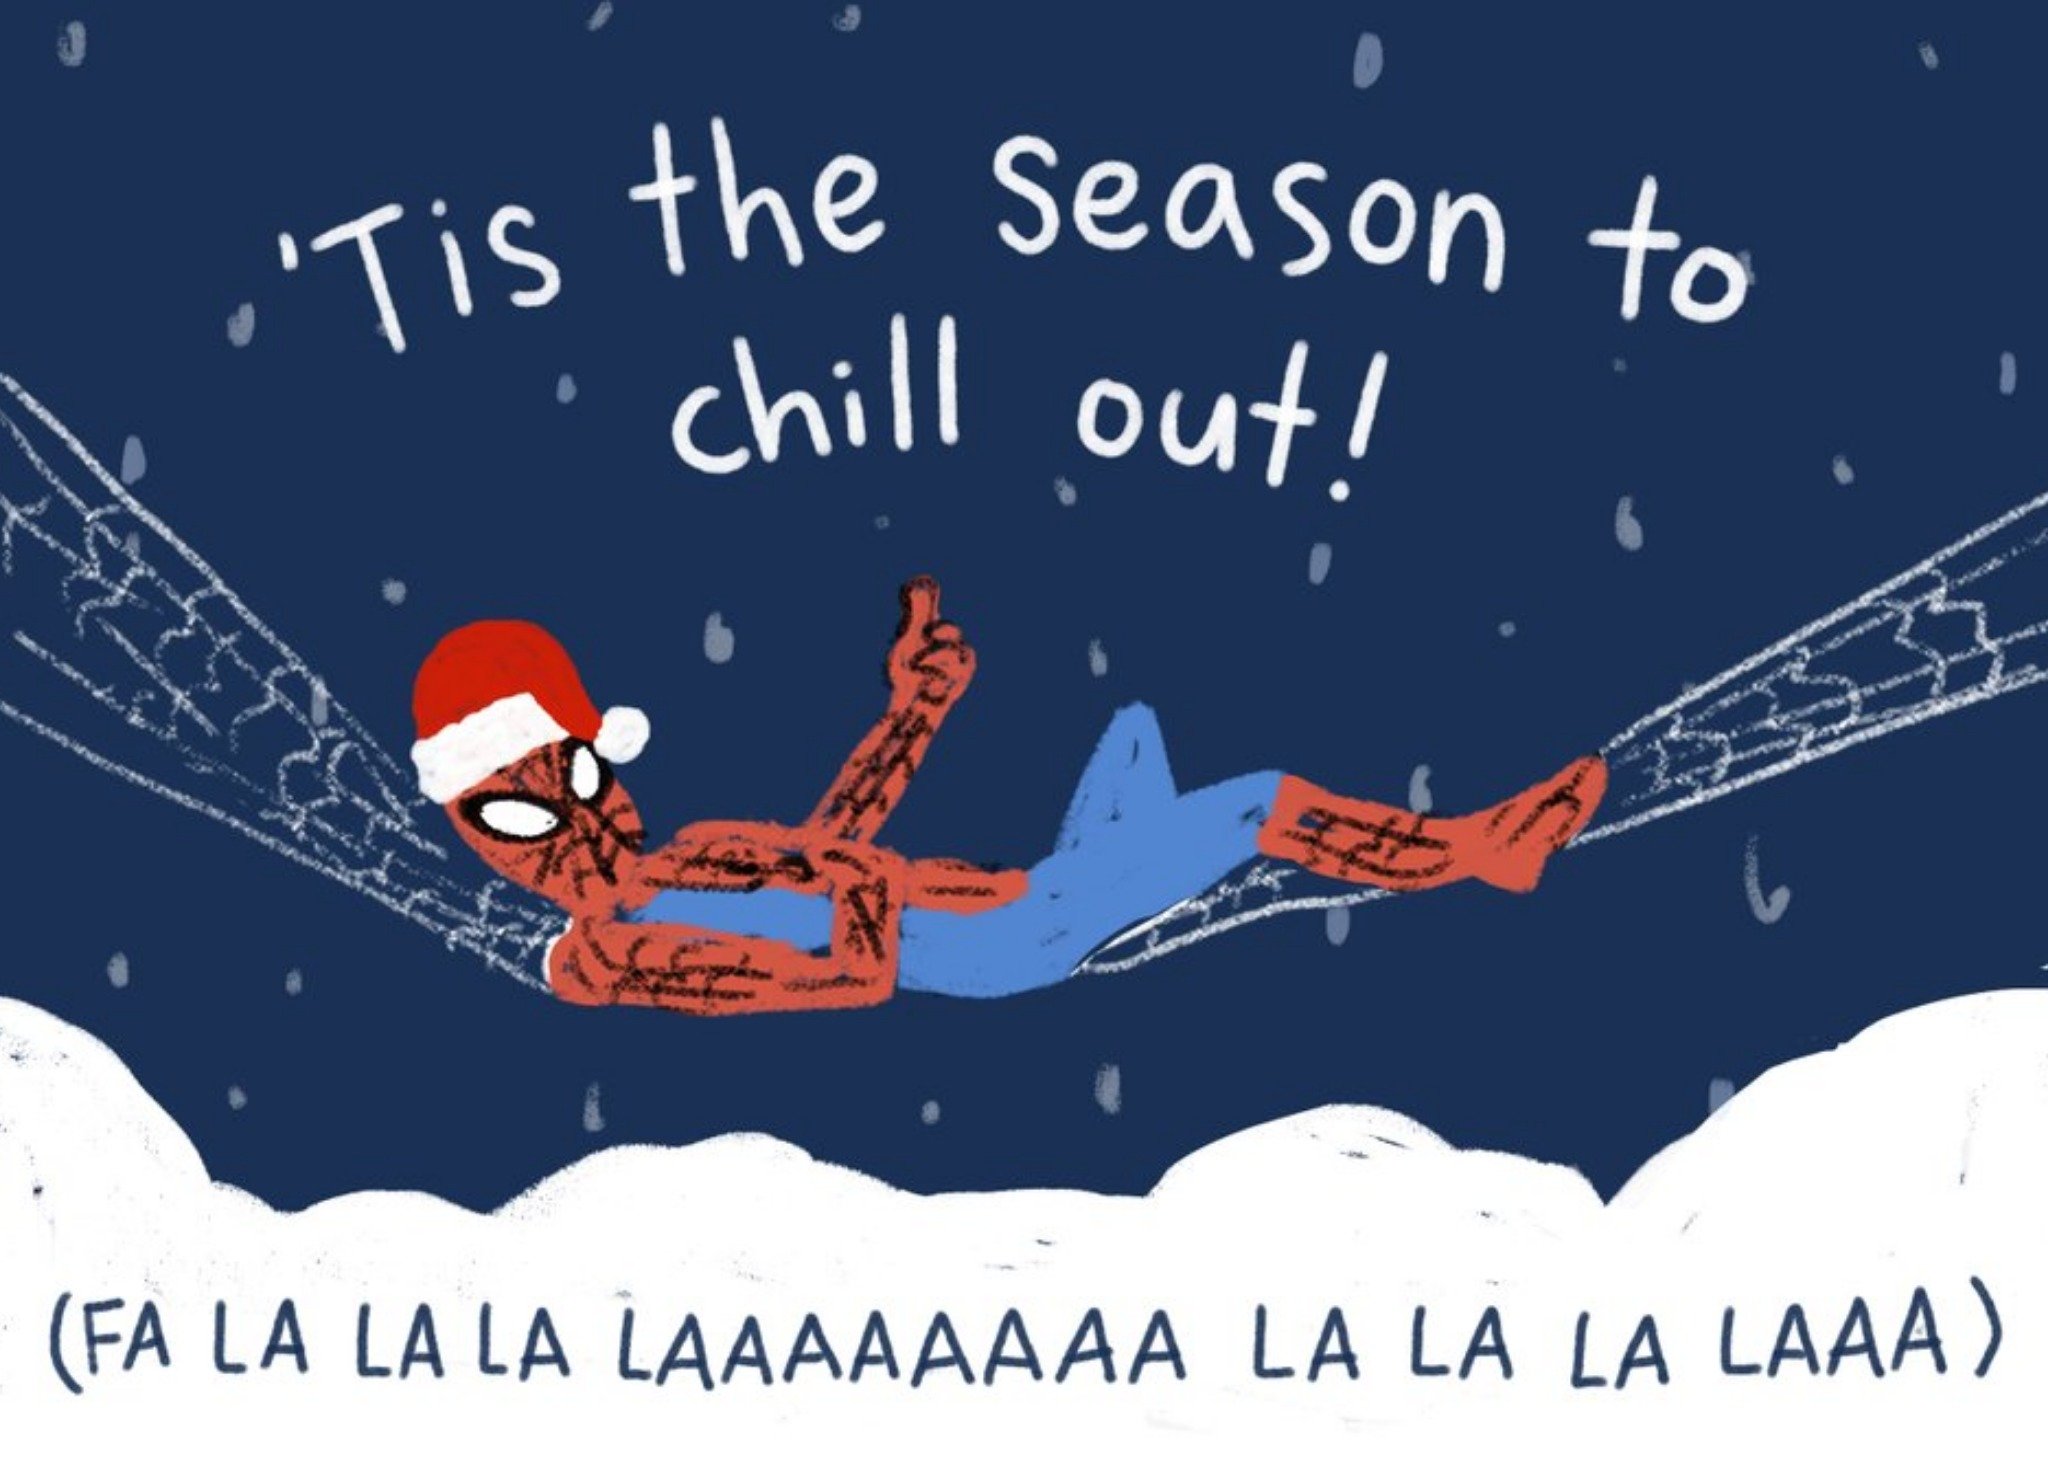 Marvel Spiderman Tis The Season To Chill Out Christmas Card, Large